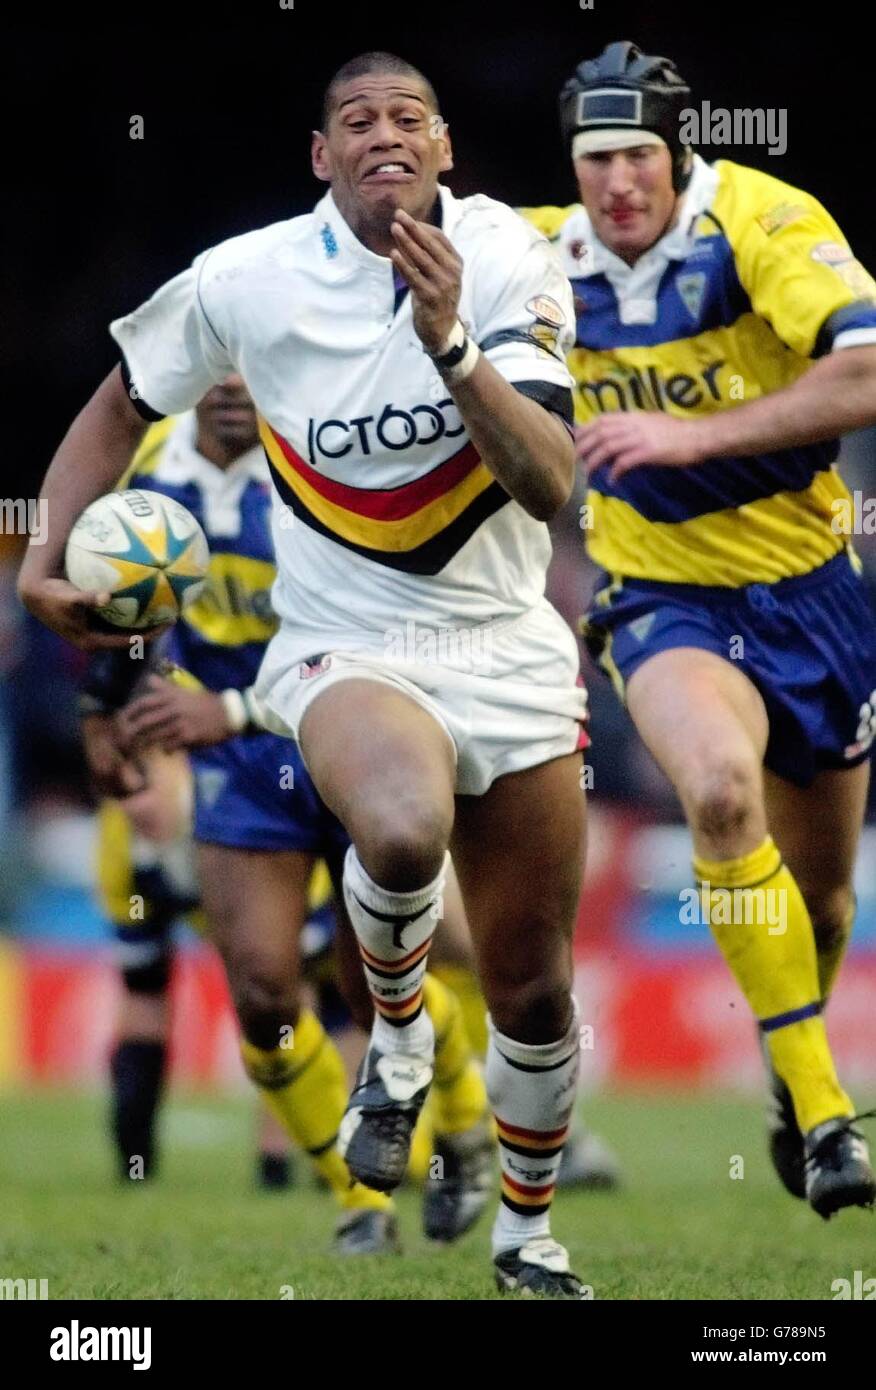 Bradford's Leon Pryce (left) gets away from Warrington's Mike Wainwright on his way to scoring a try during their Powergen Challenge Cup Fourth Round match at the Wilderspool stadium, Warrington. 20/10/03: Leon Pryce (left) appeared at Teeside Crown Court. Pryce, 22, pleaded guilty to unlawful wounding following an attack on Edward McGuinness, a coach with Salford Reds. The Bradford Bulls player, who came on as a substitute during Saturday's Grand Final win over Wigan Warriors, had denied a charge of unlawful wounding with intent and his guilty plea to the lesser charge was accepted by the Stock Photo